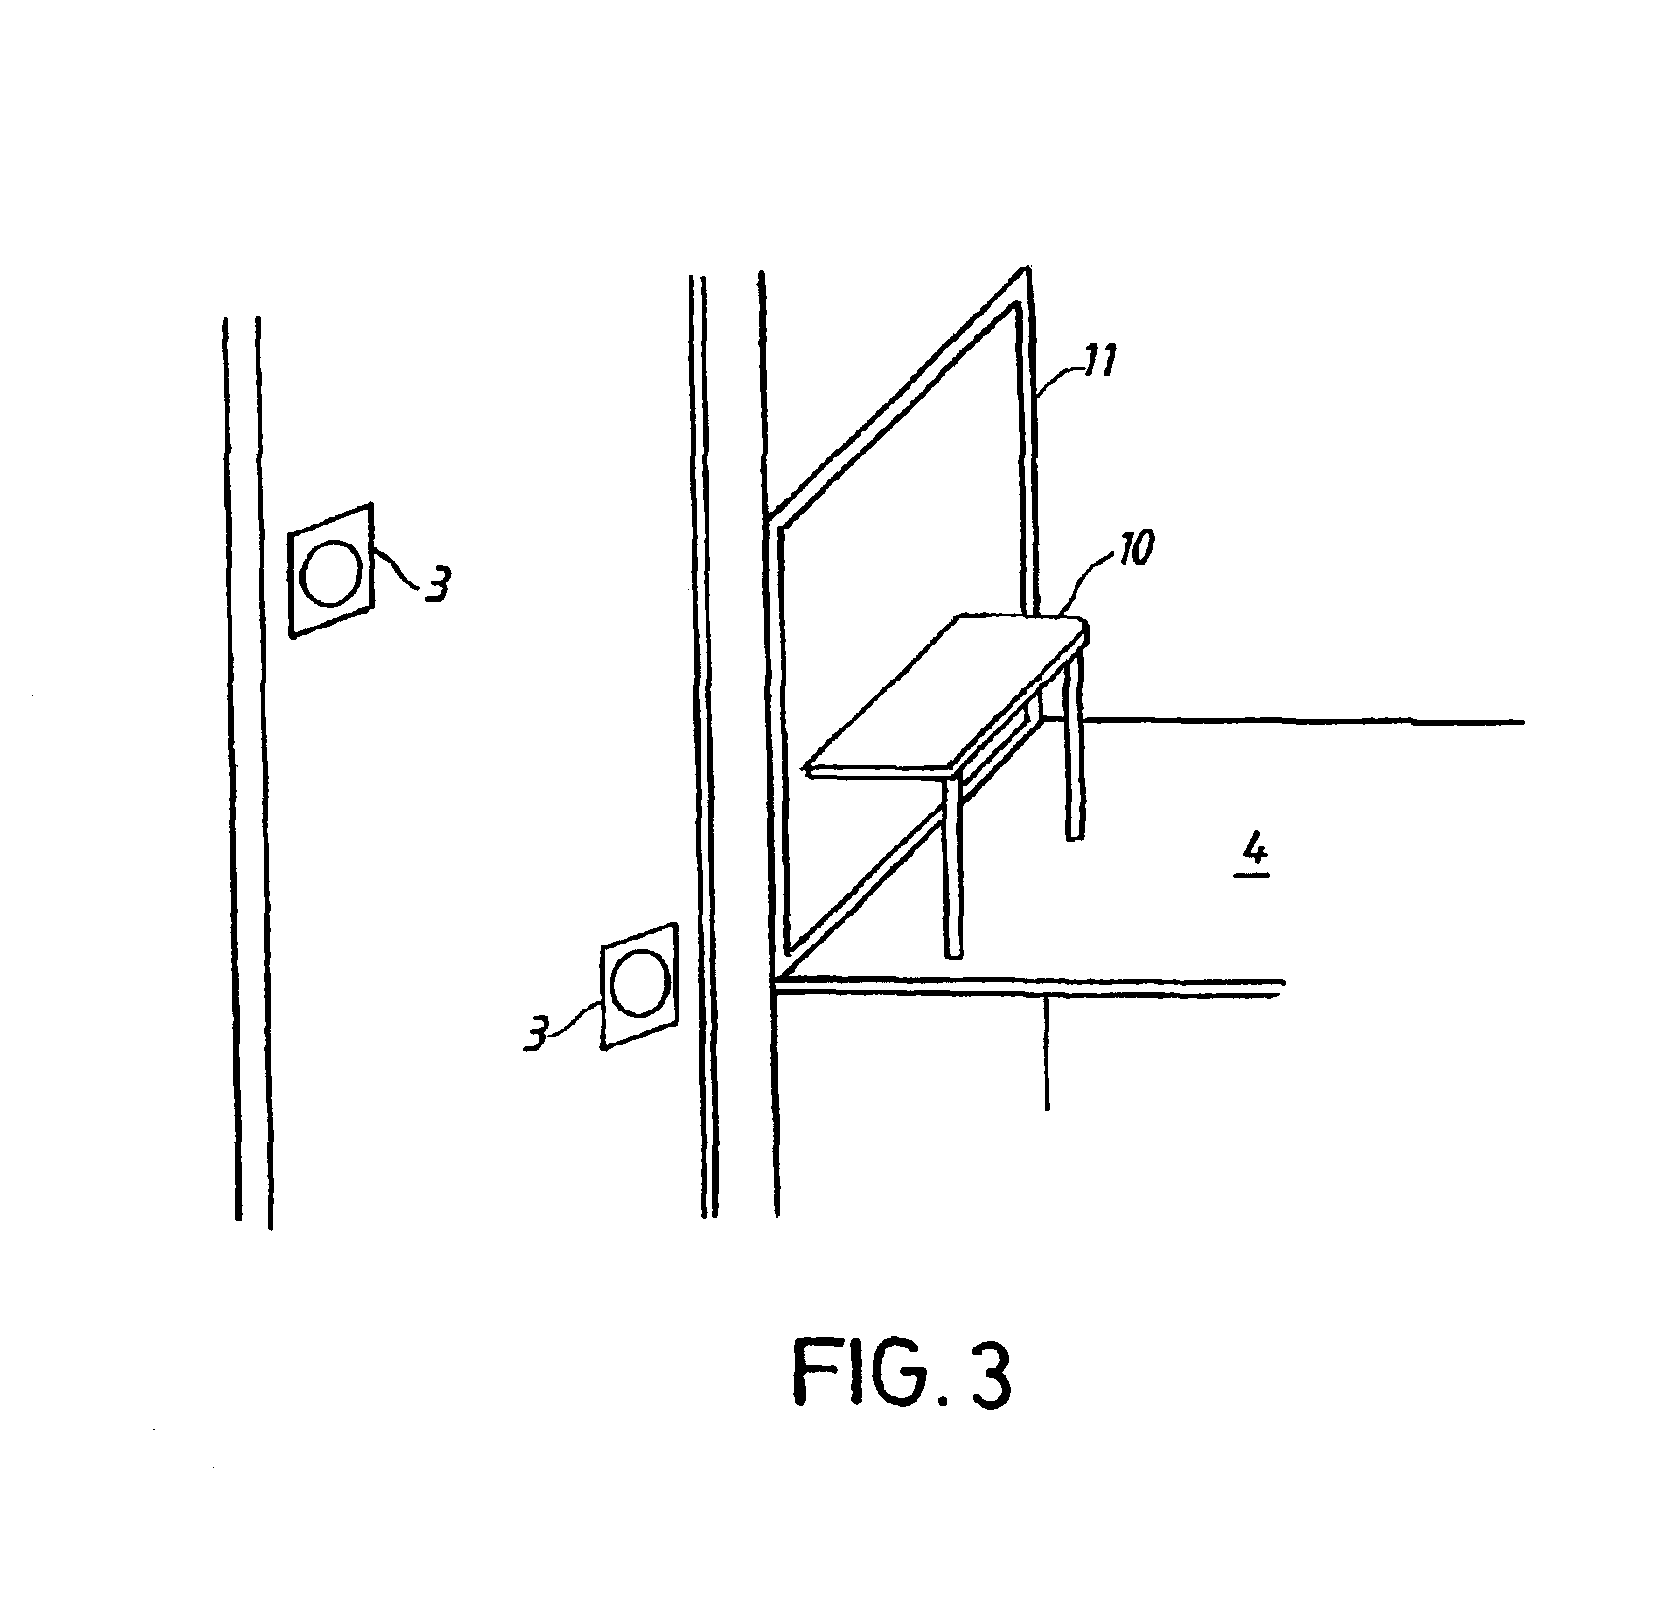 Method and apparatus for keeping a check on the storage time for goods in a storage